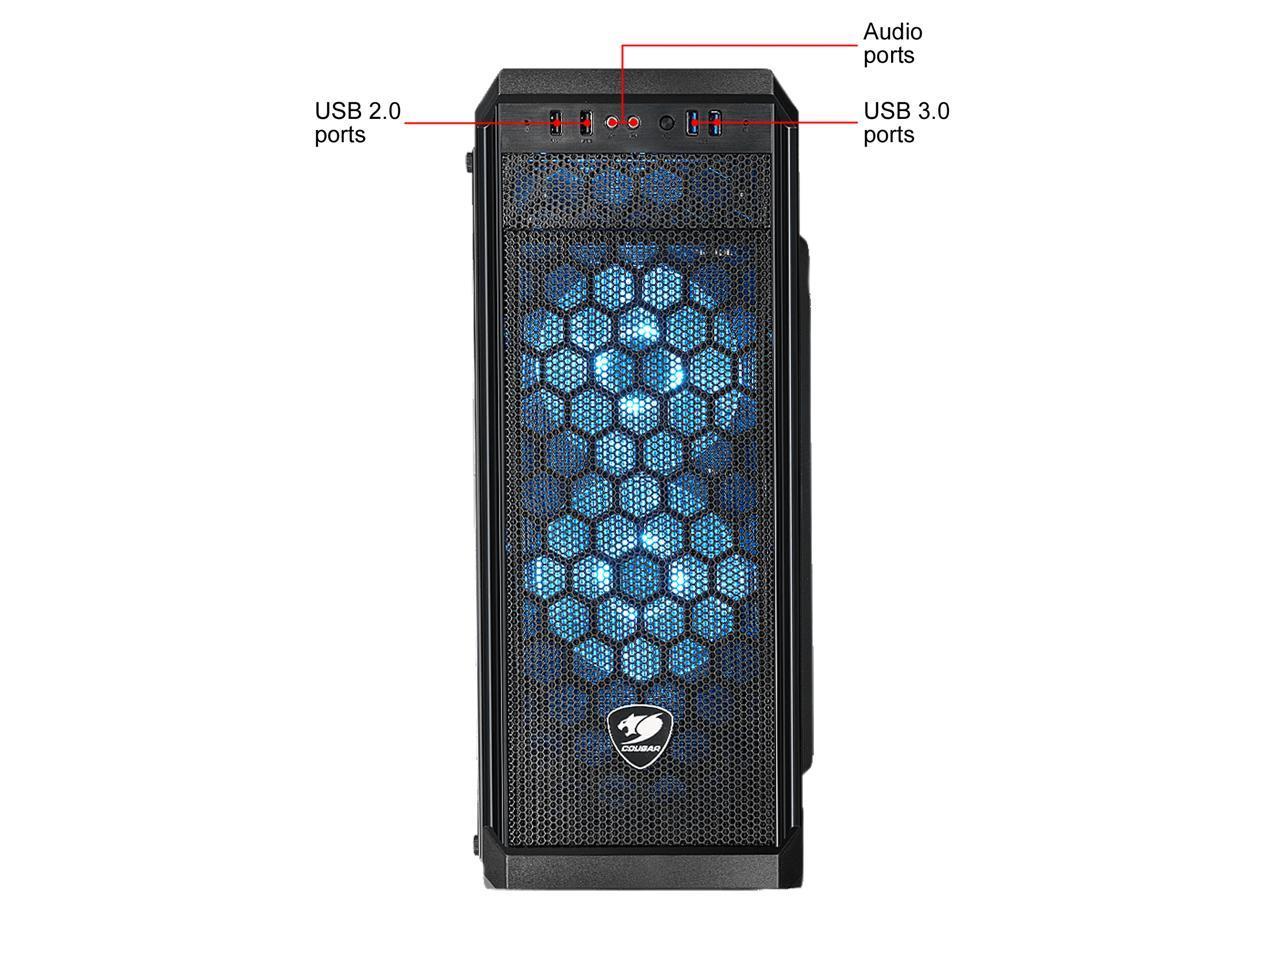 COUGAR MX330-G Air Black Steel / Tempered Glass ATX Mid Tower Computer Case